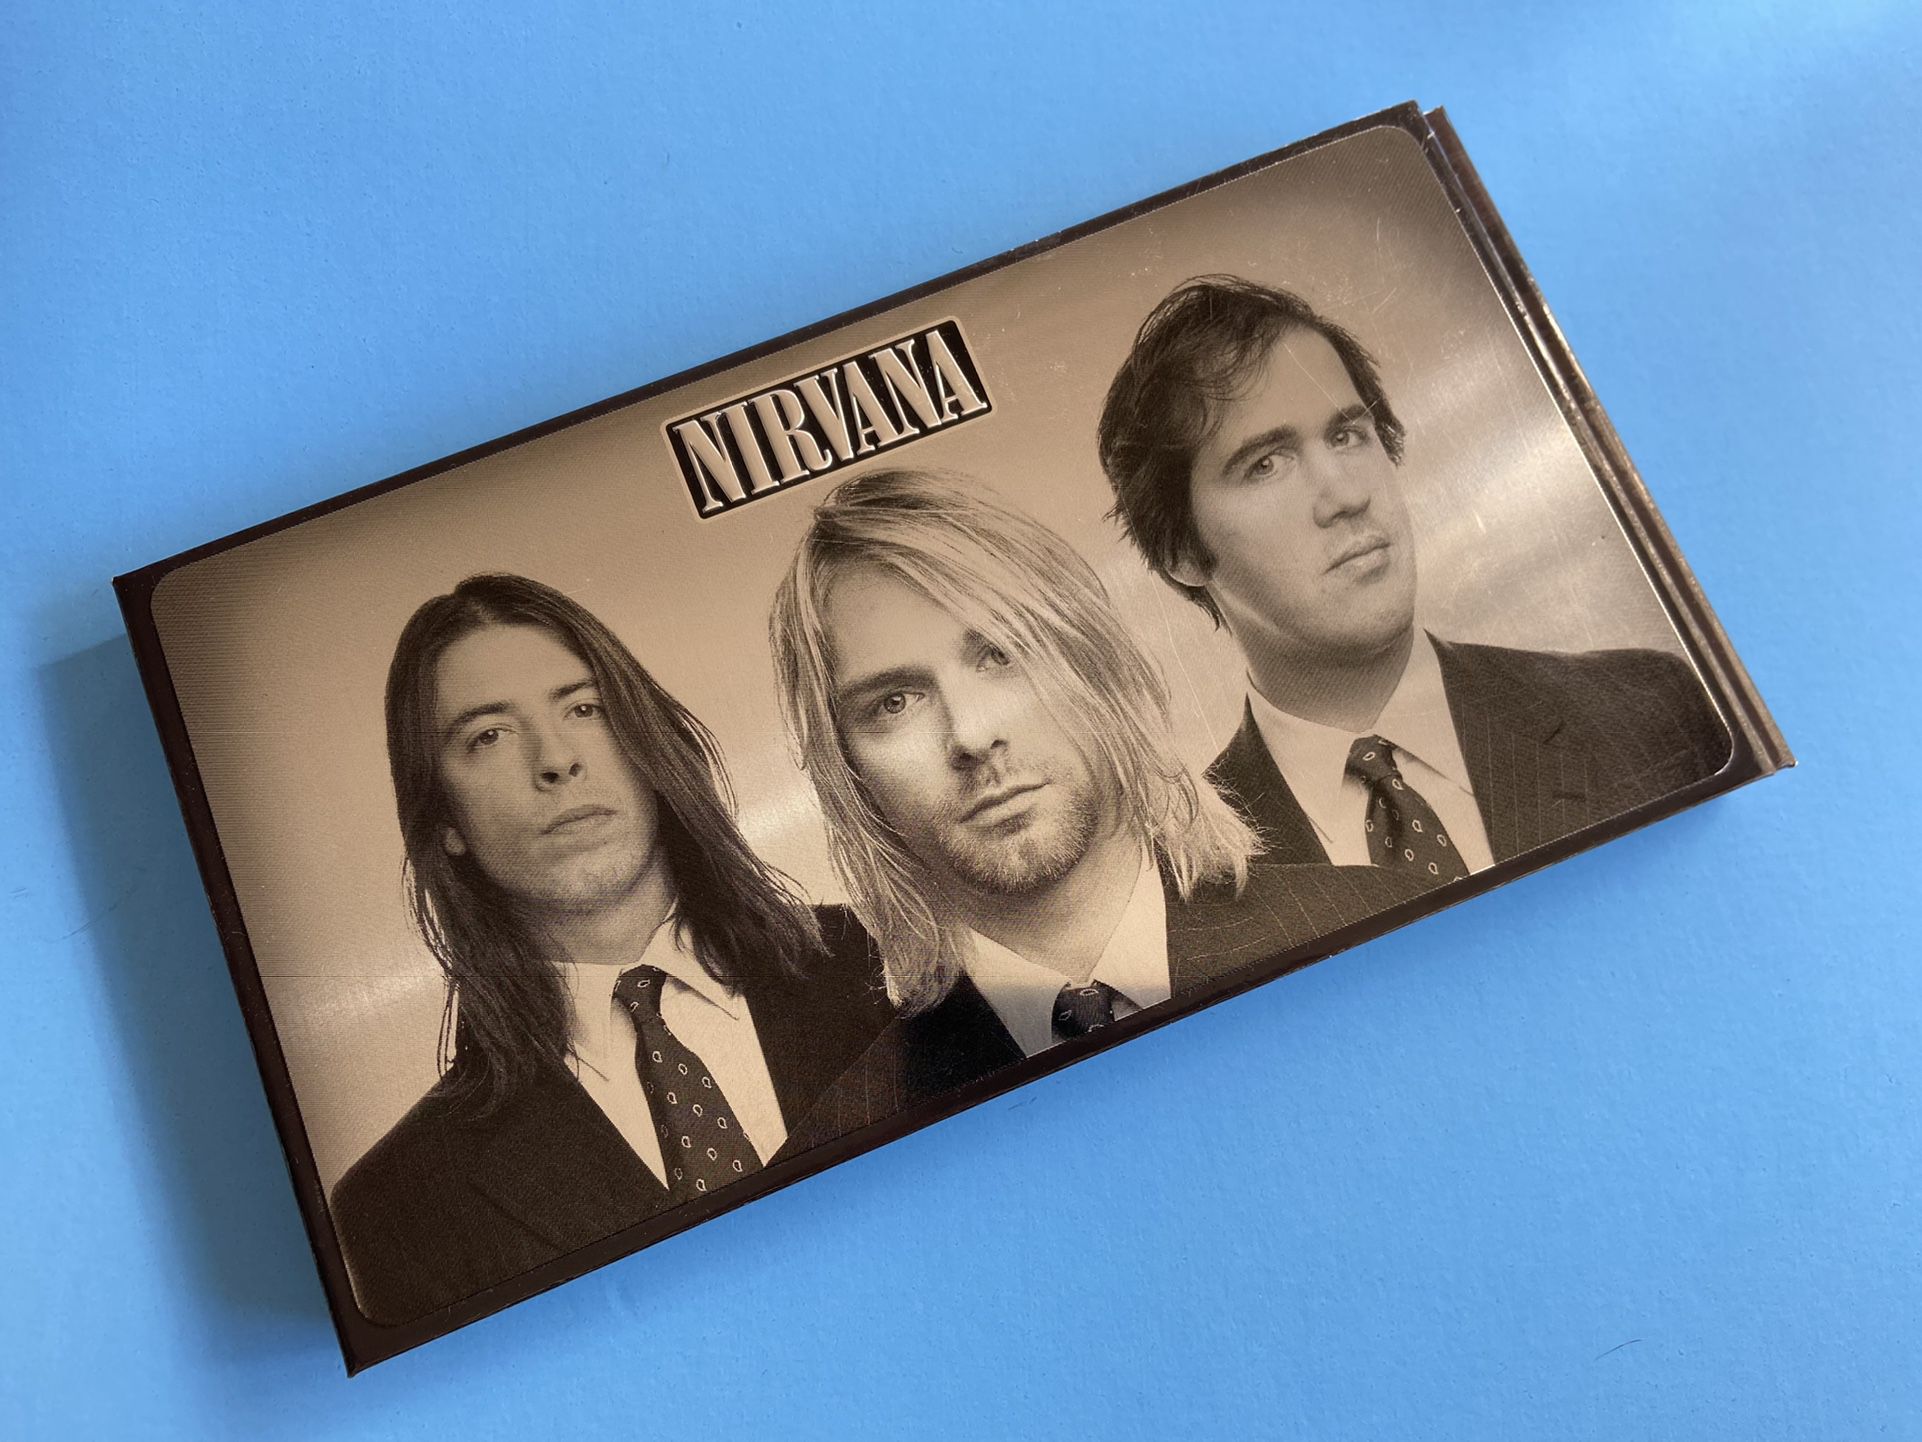 Nirvana “With The Lights Out” CD Box Set 2004